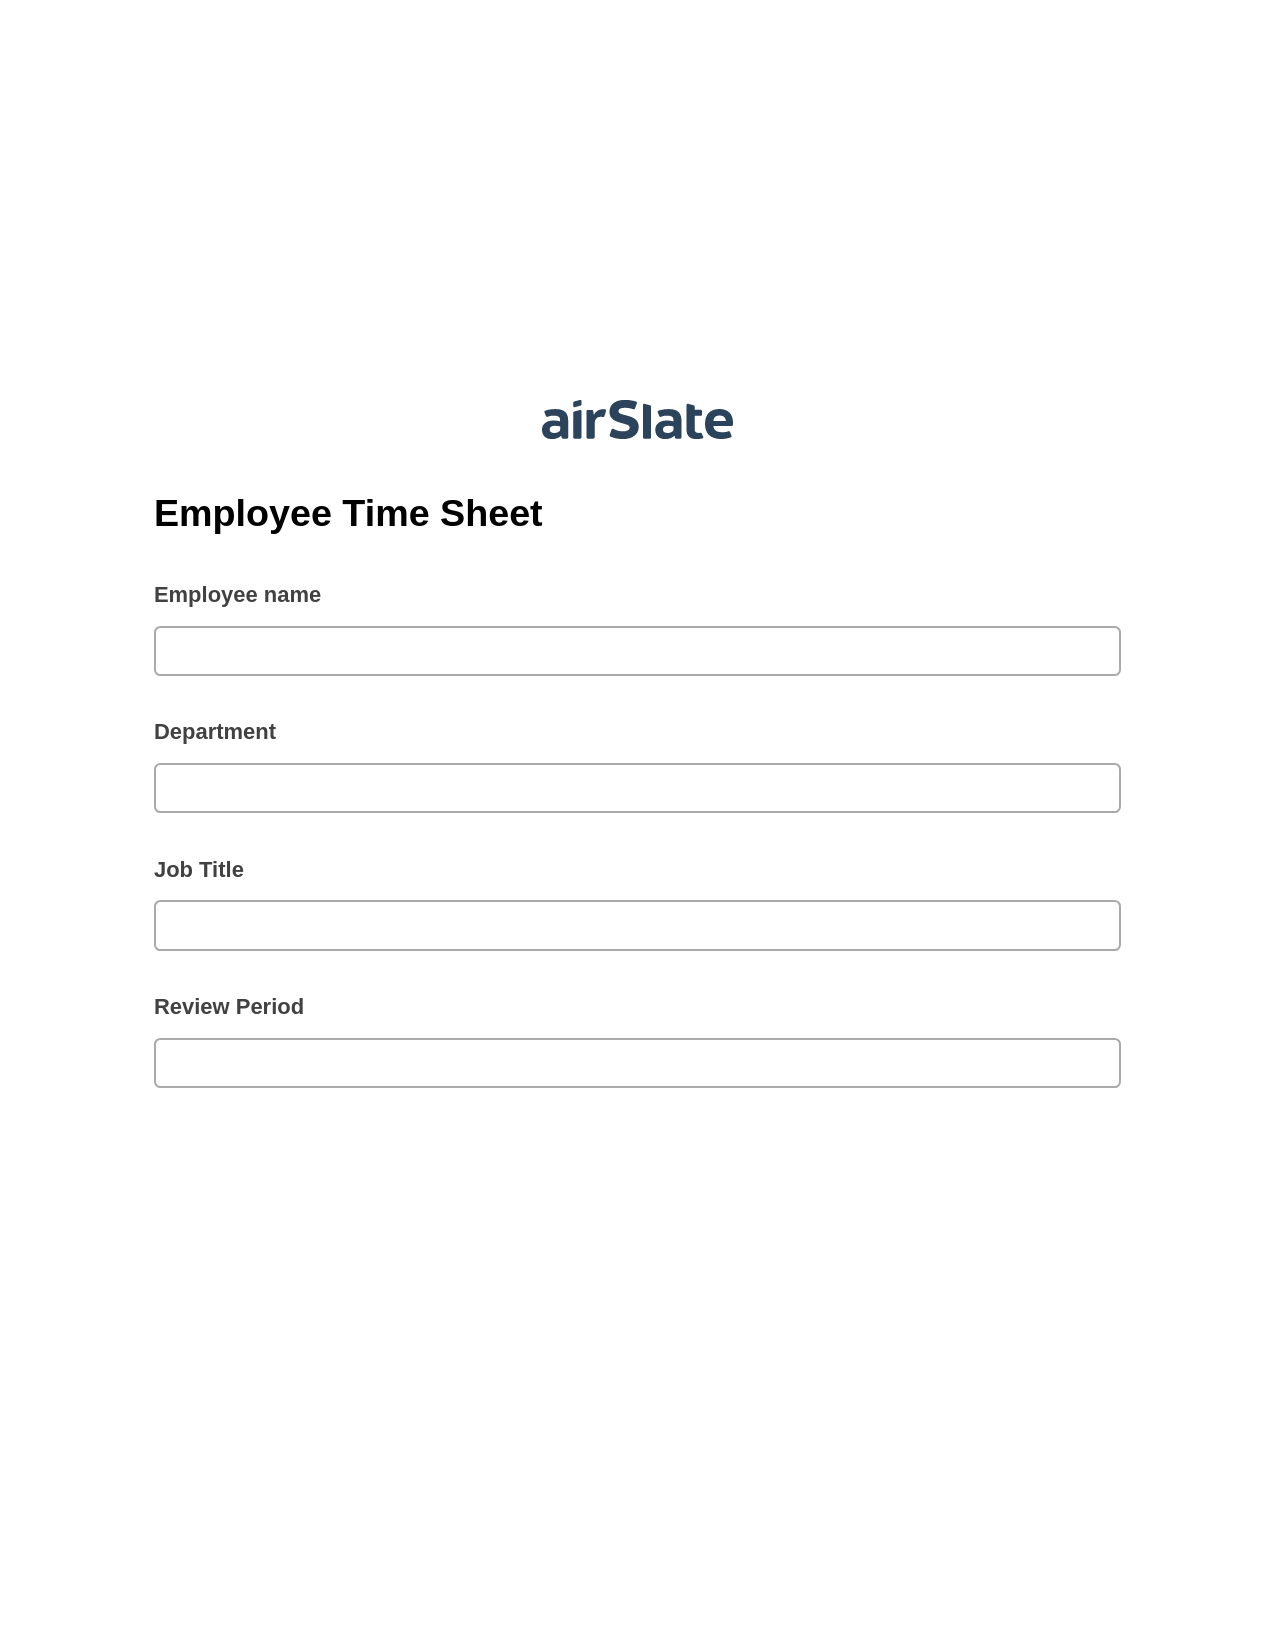 Employee Time Sheet Pre-fill from CSV File Bot, Update Audit Trail Bot, Email Notification Postfinish Bot